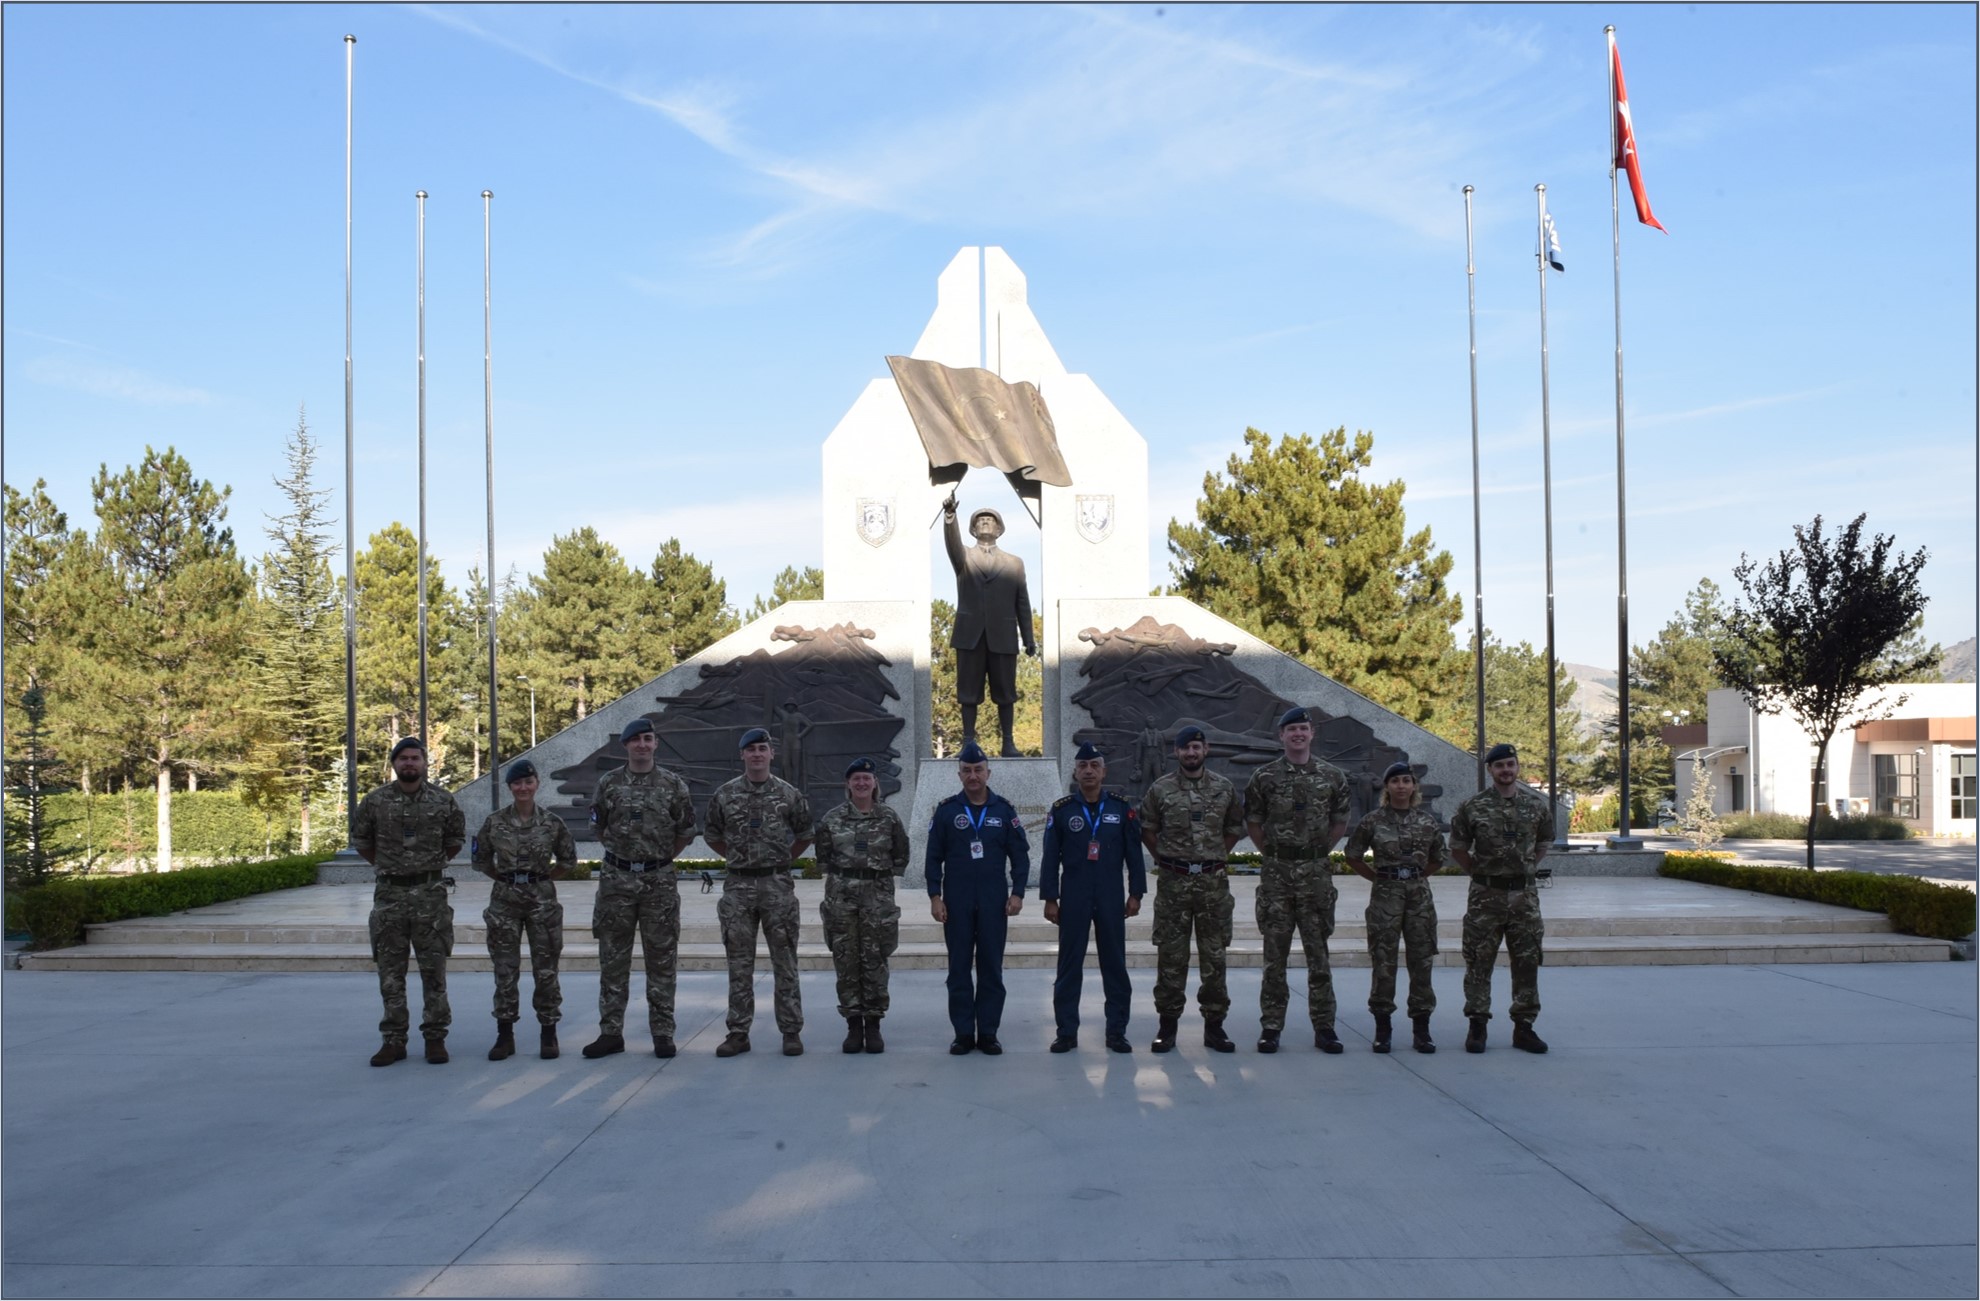 Image shows personnel standing by memorial statue with figure of soldier in the middle..